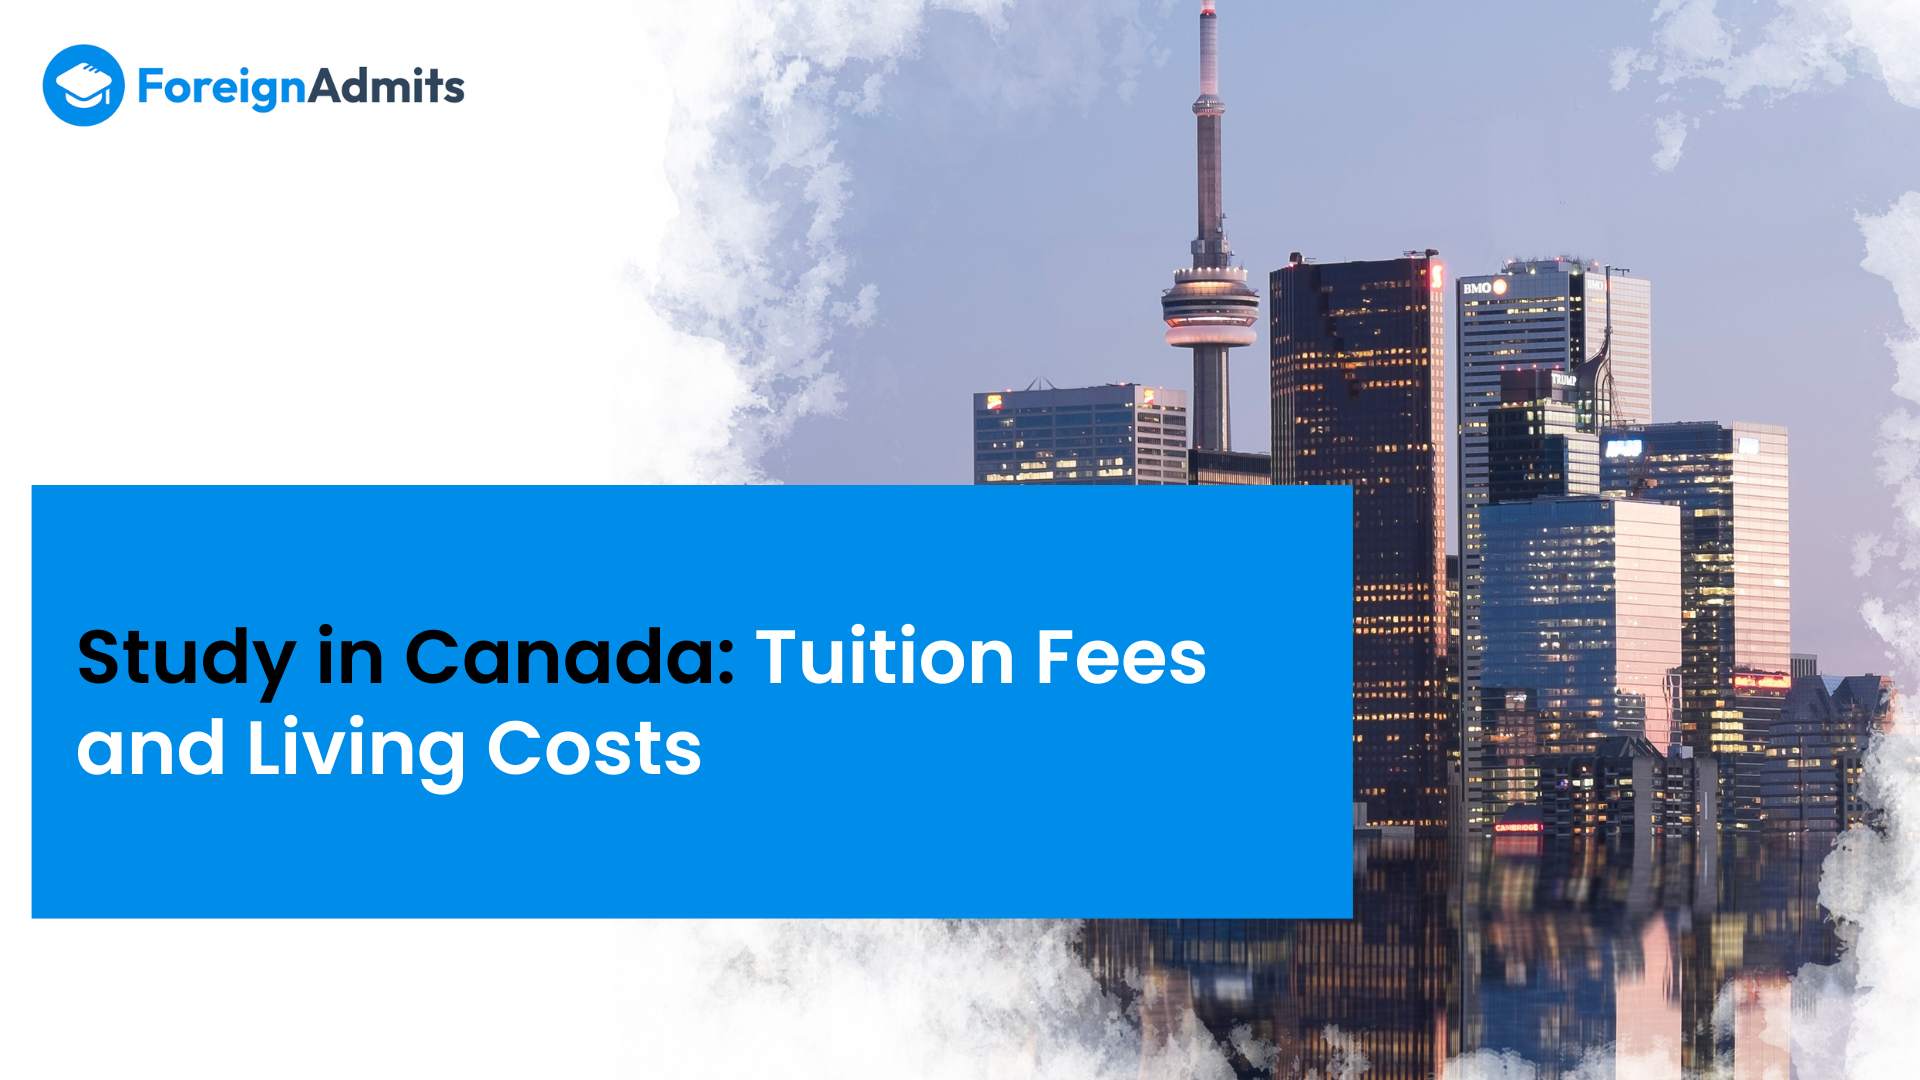 Study in Canada: Tuition Fees and Living Costs